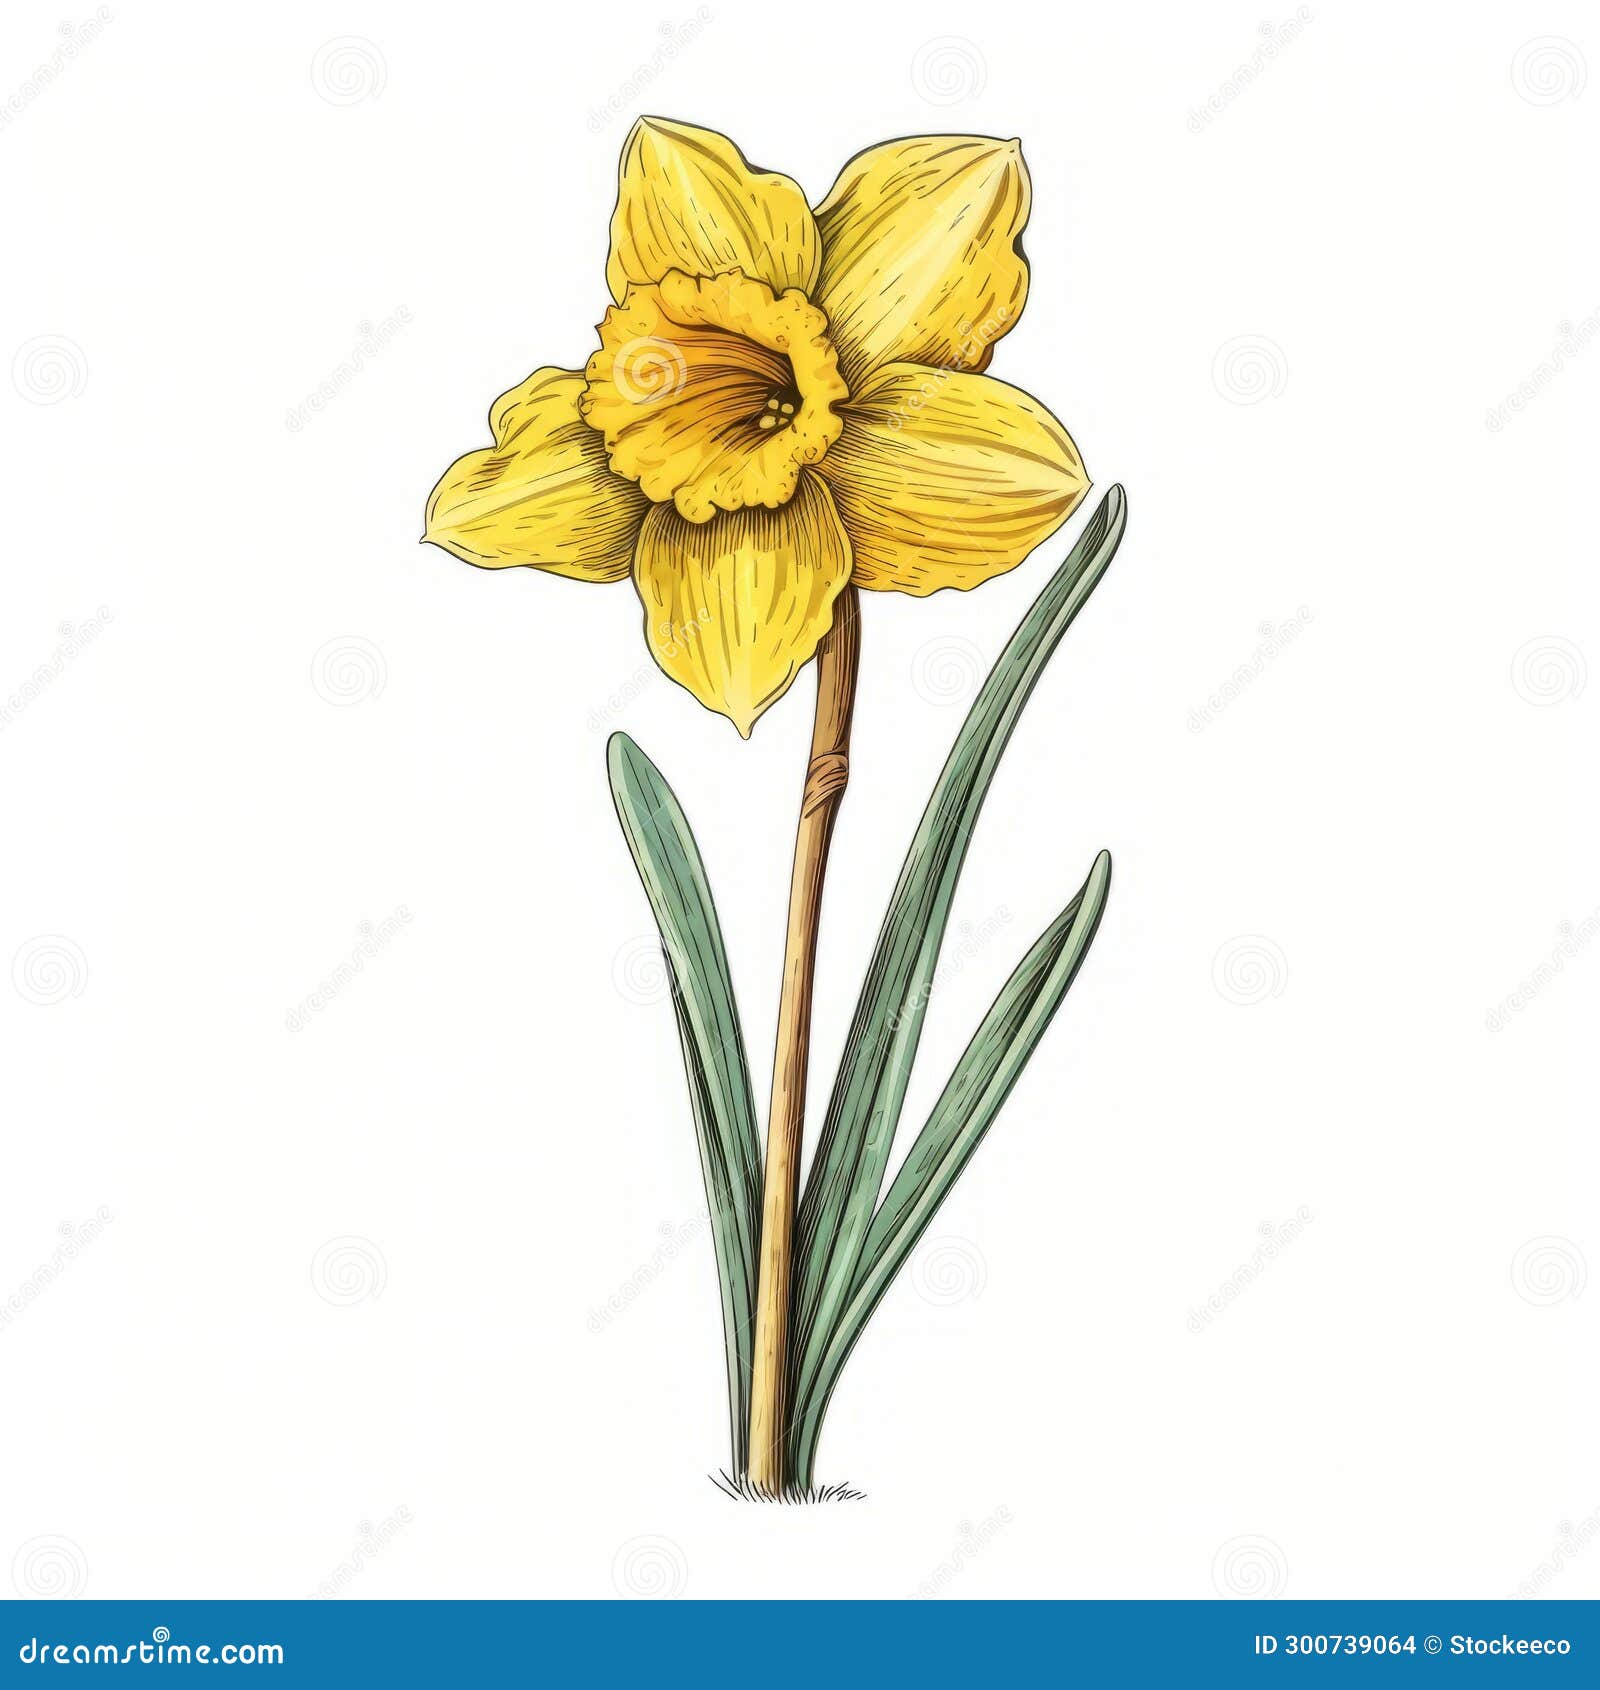 colorized yellow daffodil: traditional techniques reimagined in pop-culture-infused 